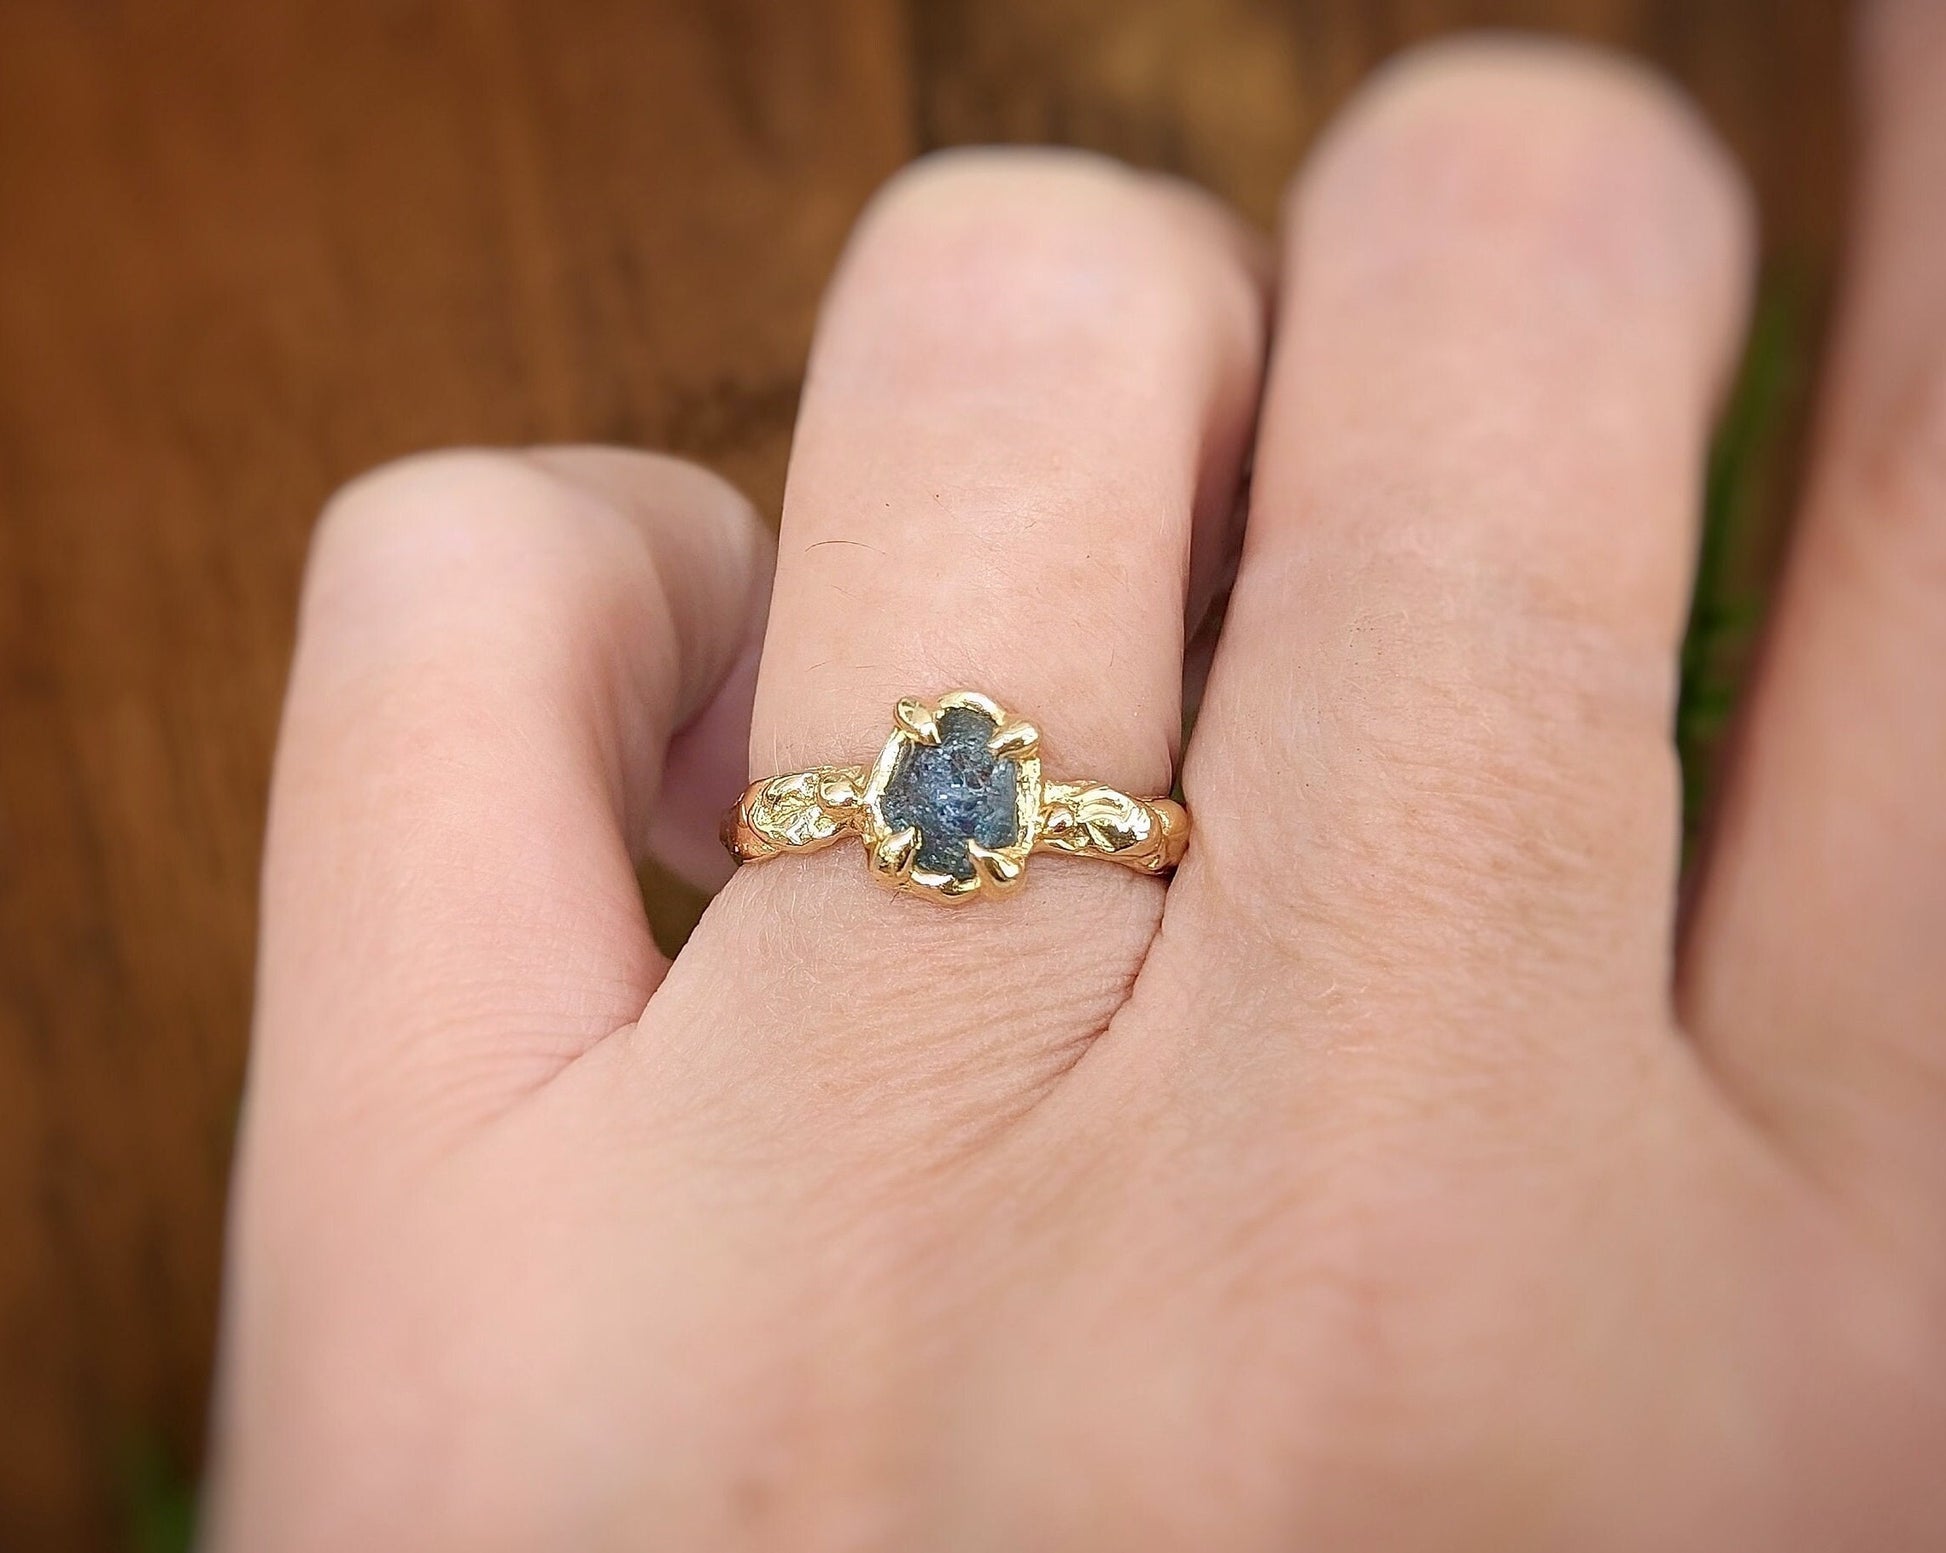 Hand wearing a Raw Montana Sapphire set by prongs on a textured Solid 14k Gold band